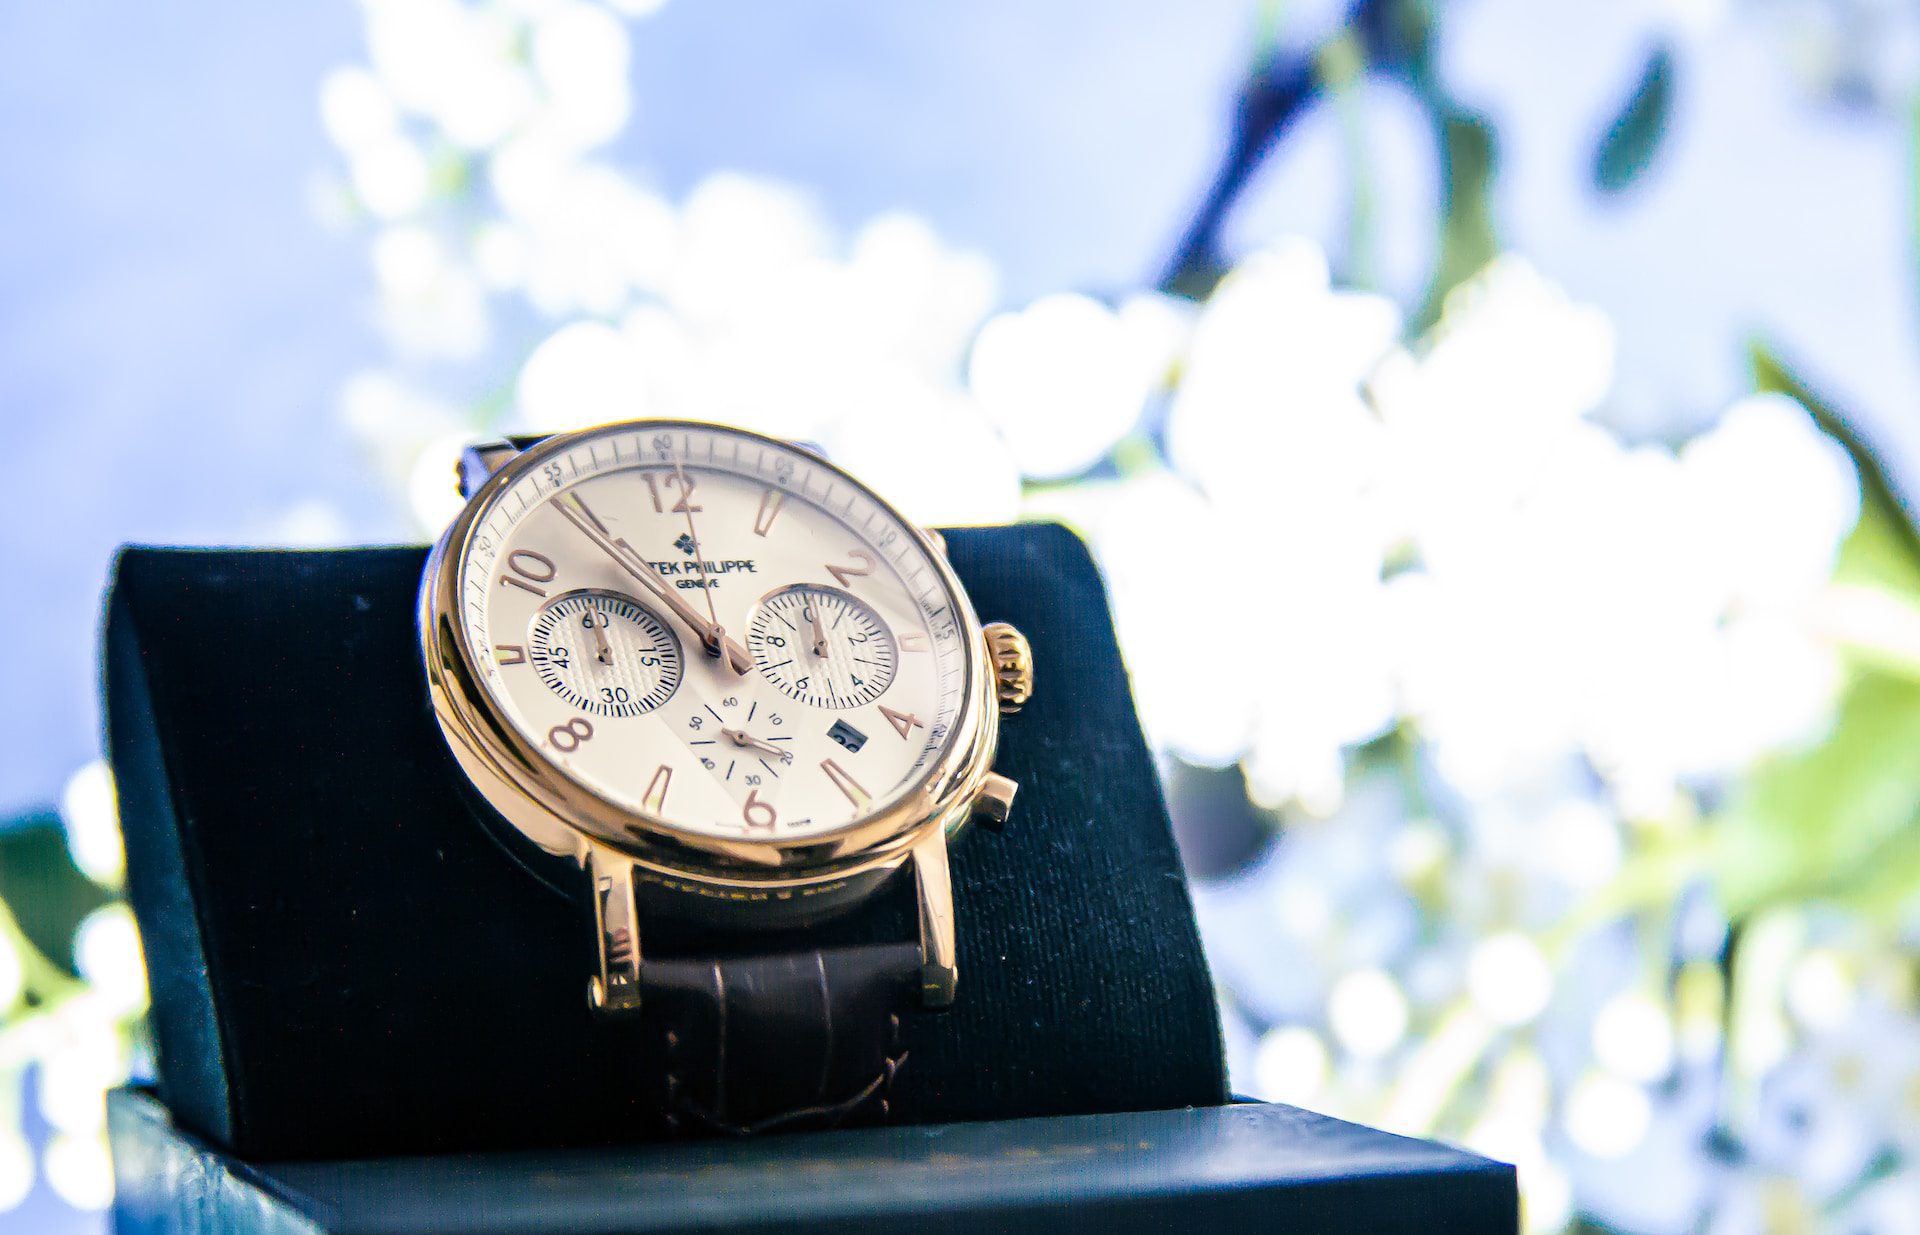 Why Patek Philippe is a Top Choice for Luxury Watch Collectors